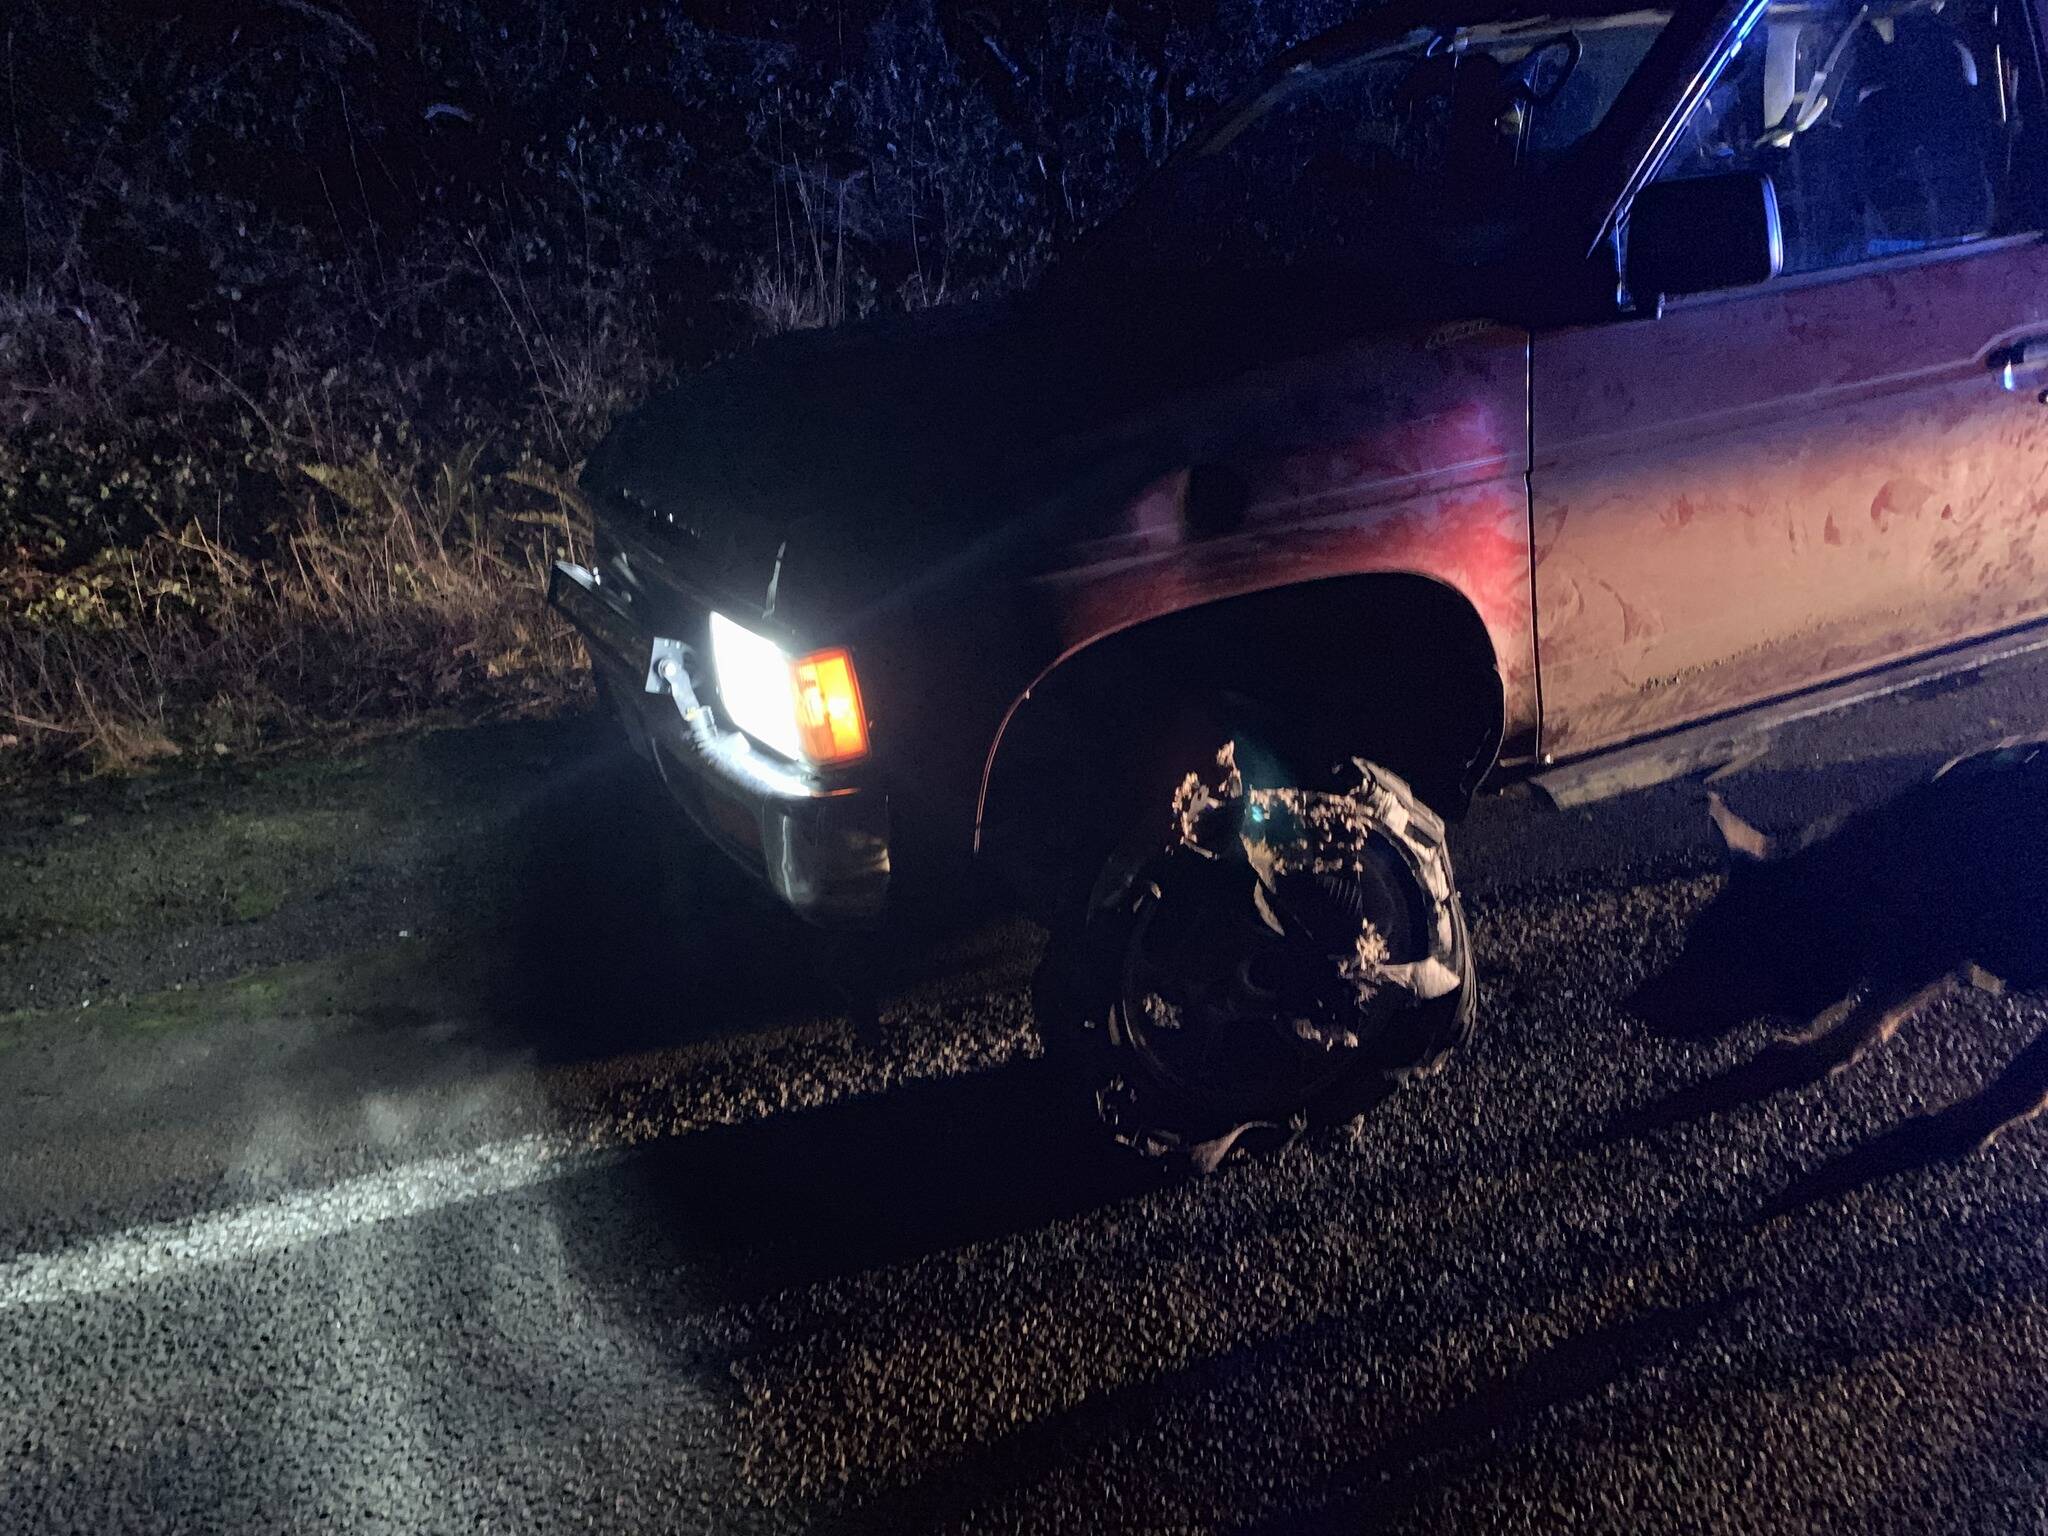 Damage to the wheels is visible following a 55-mile pursuit of a suspected DUI early last Friday that ended near Tokeland. (Grays Harbor County Sheriff’s Office / Deputy Sean McKechnie)